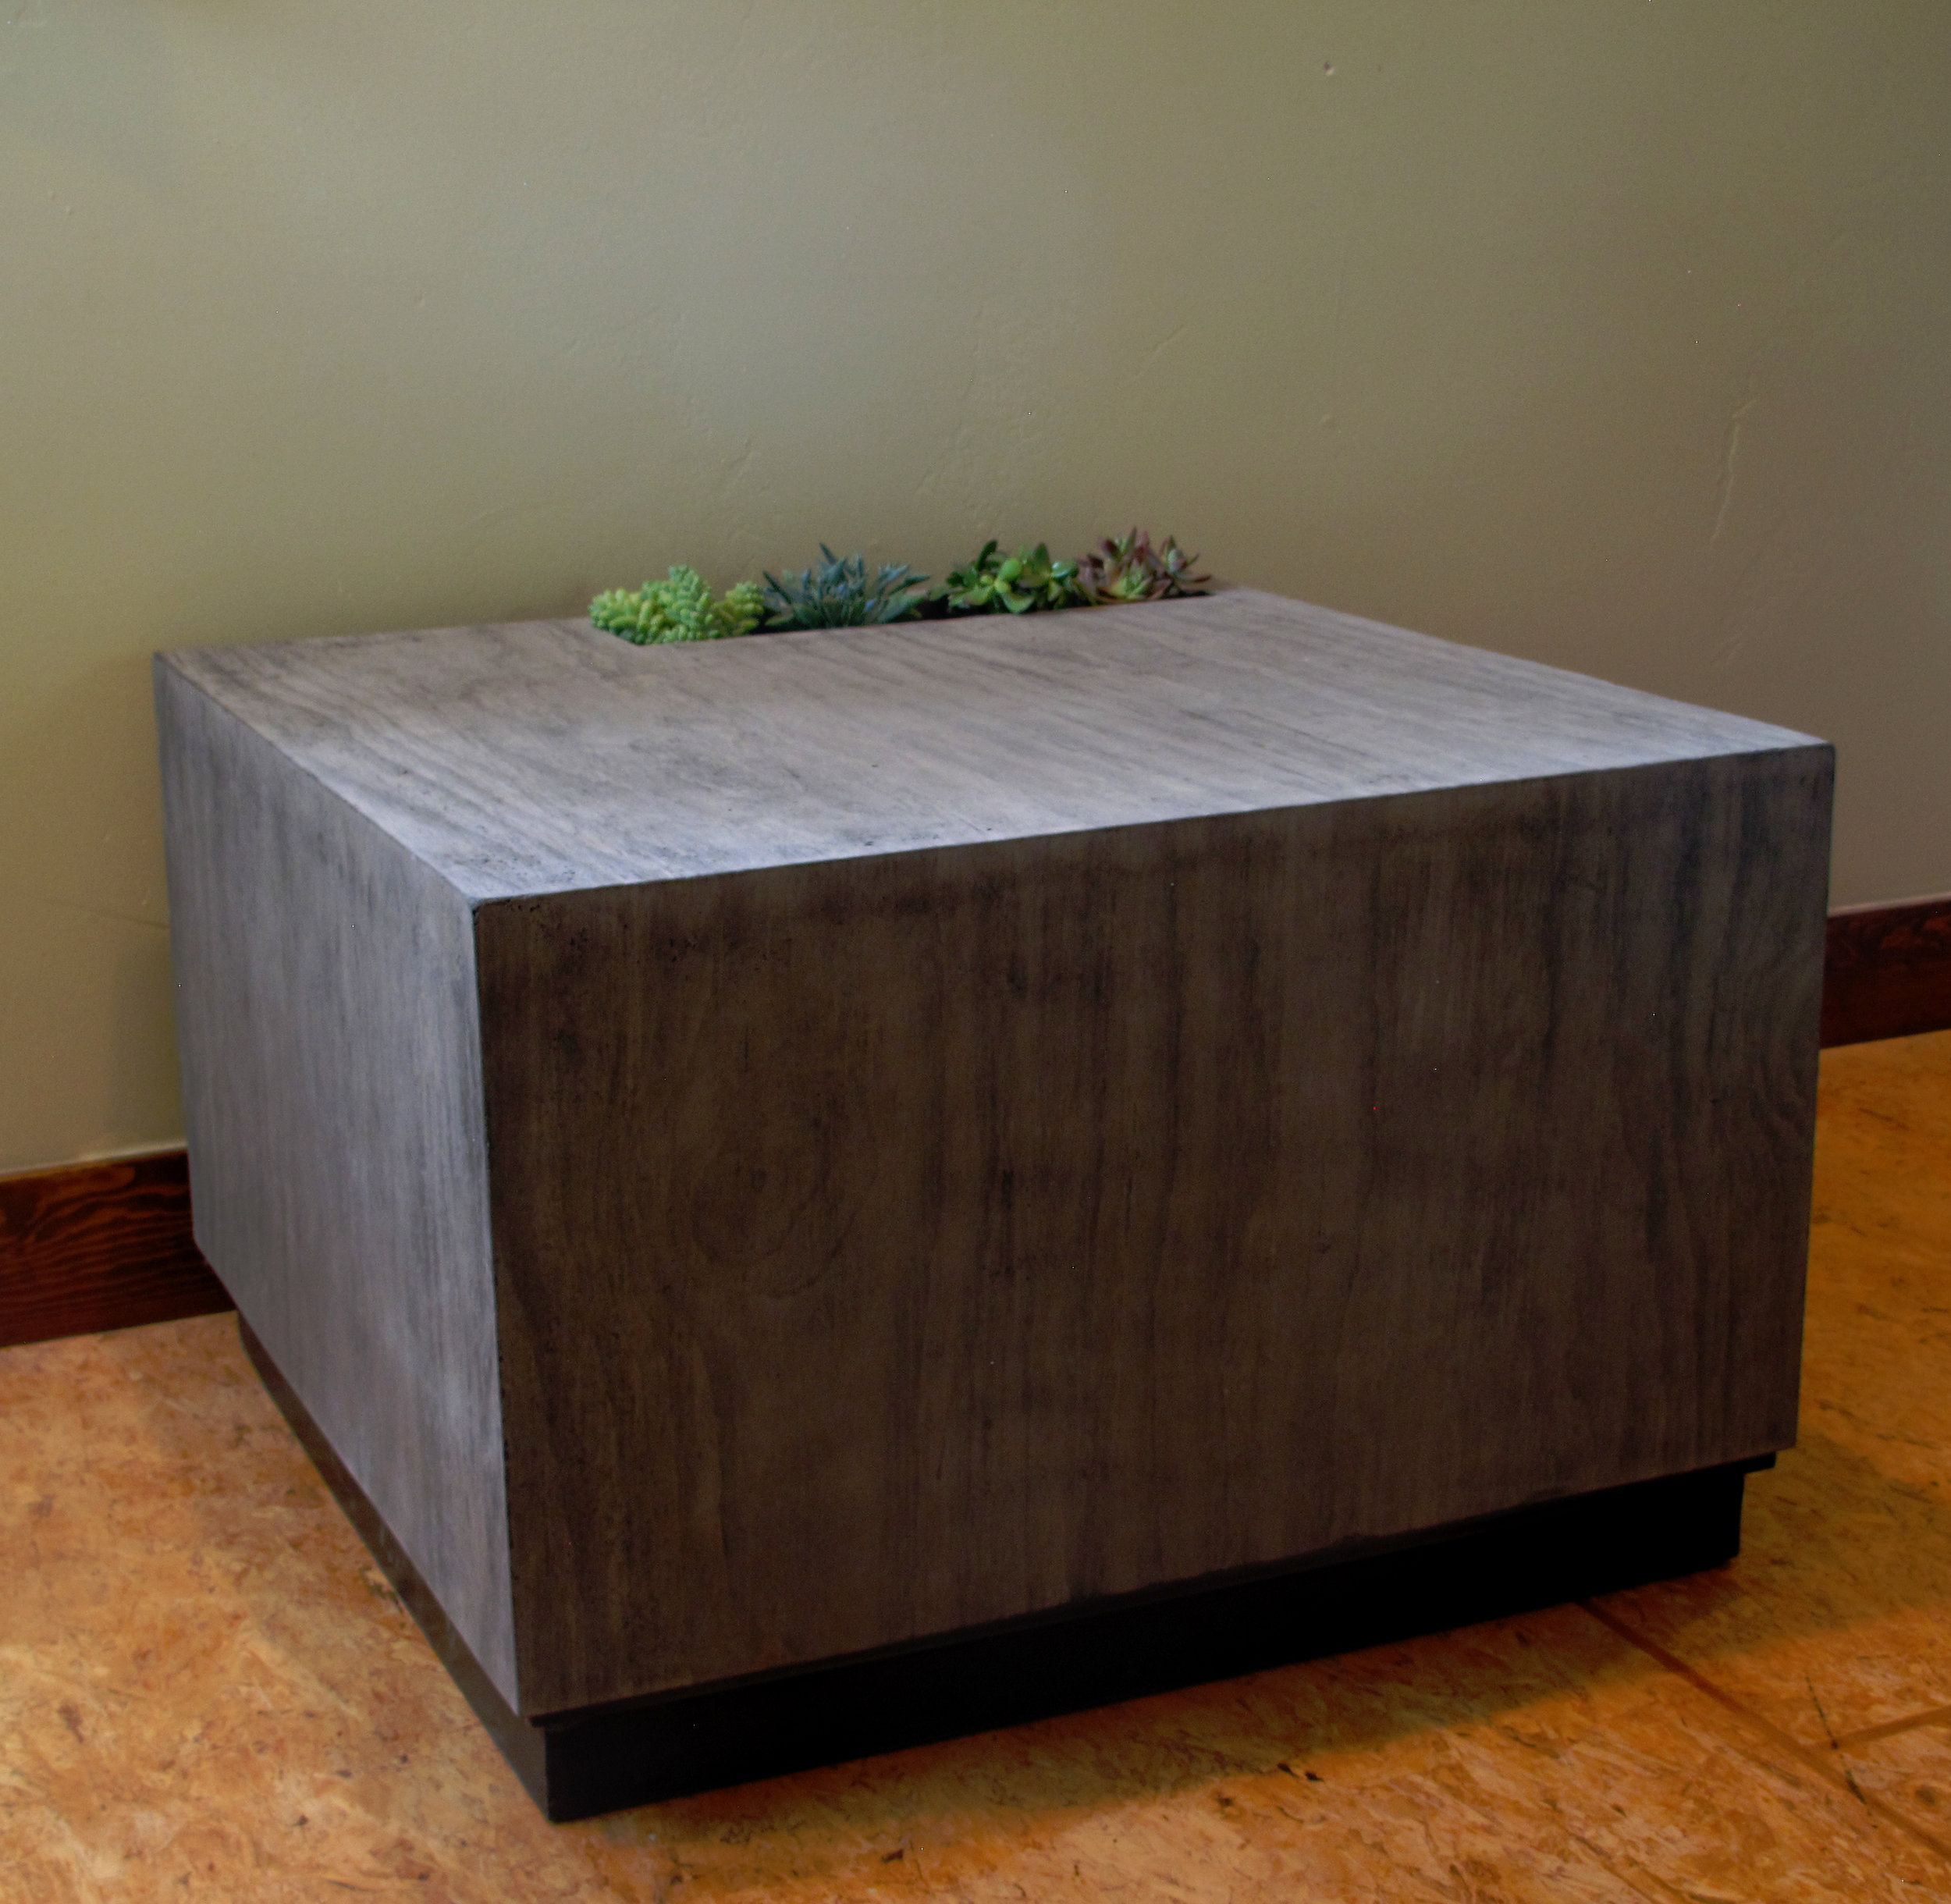 GFRC Board Formed Concrete End Table with integrated planter.JPG